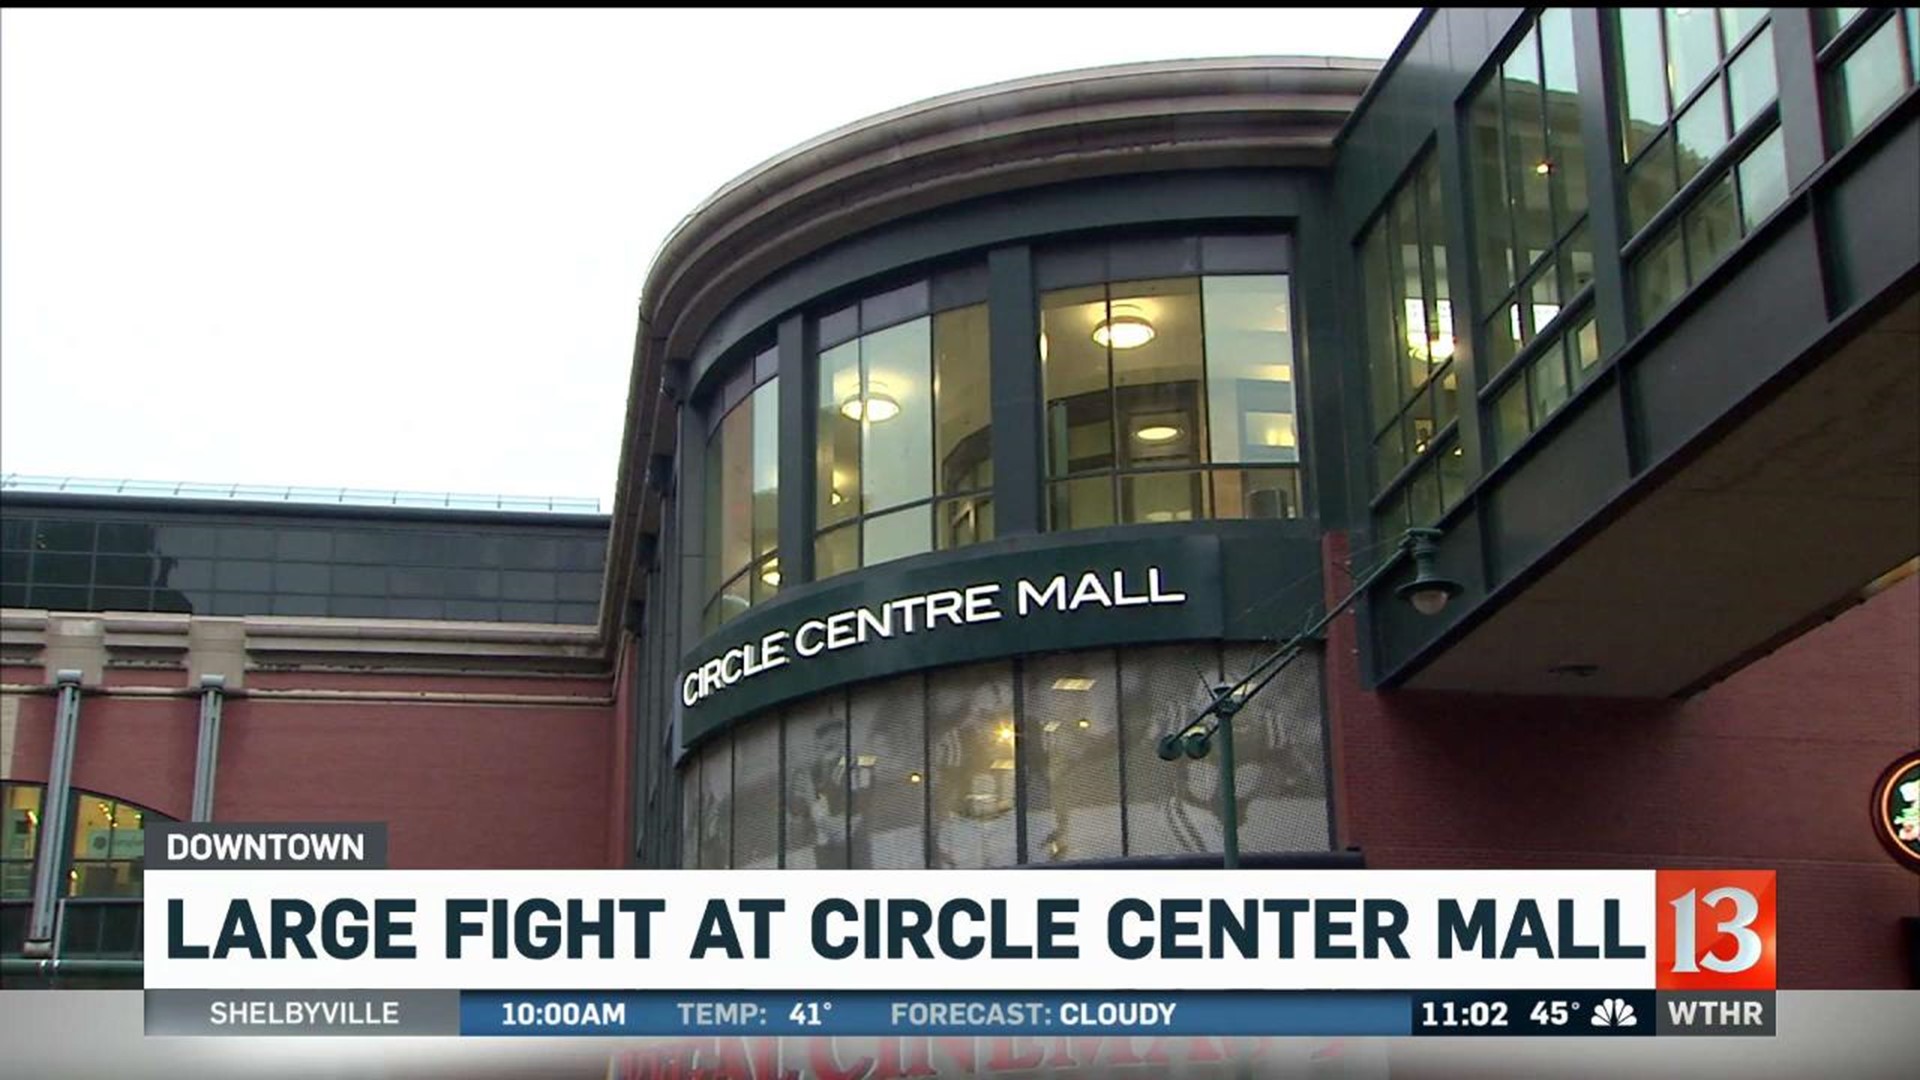 Large fight at Circle Center Mall